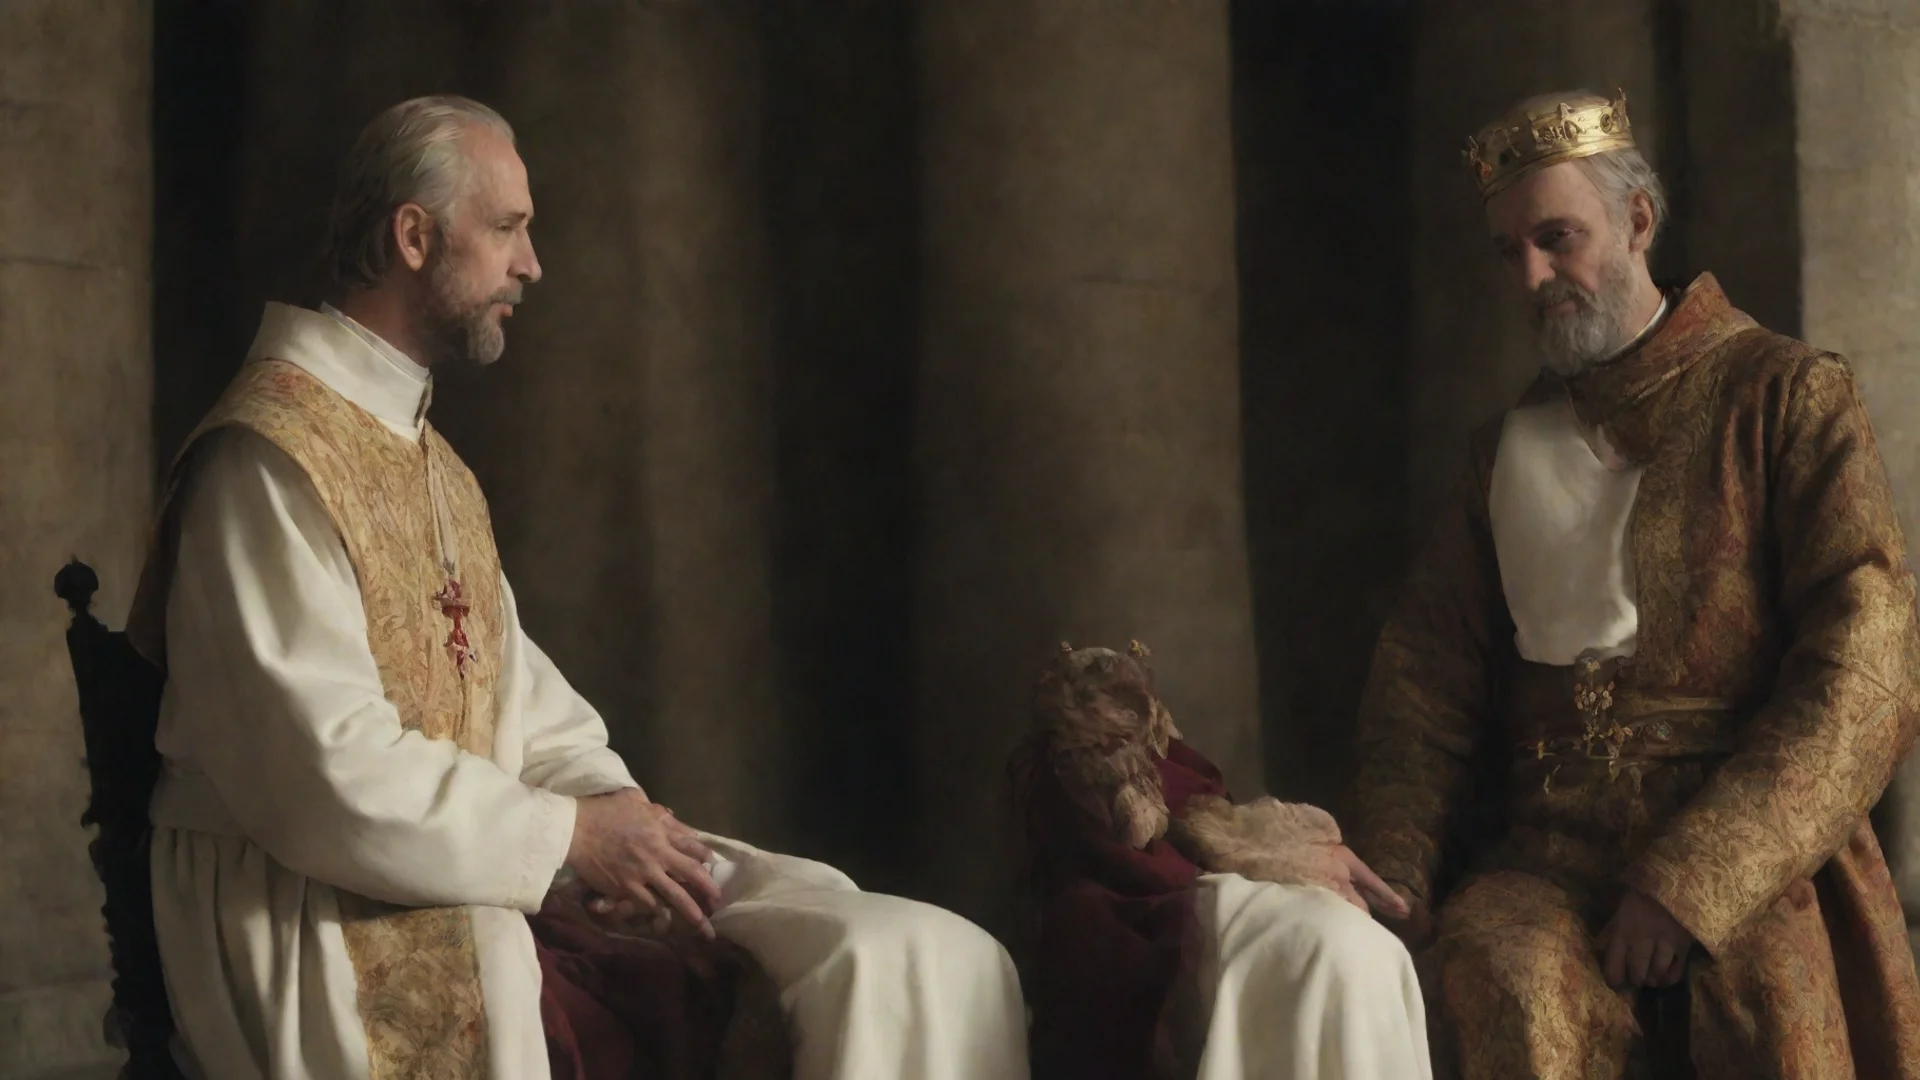 aiamazing priest and medieval king sit and talk  awesome portrait 2 wide